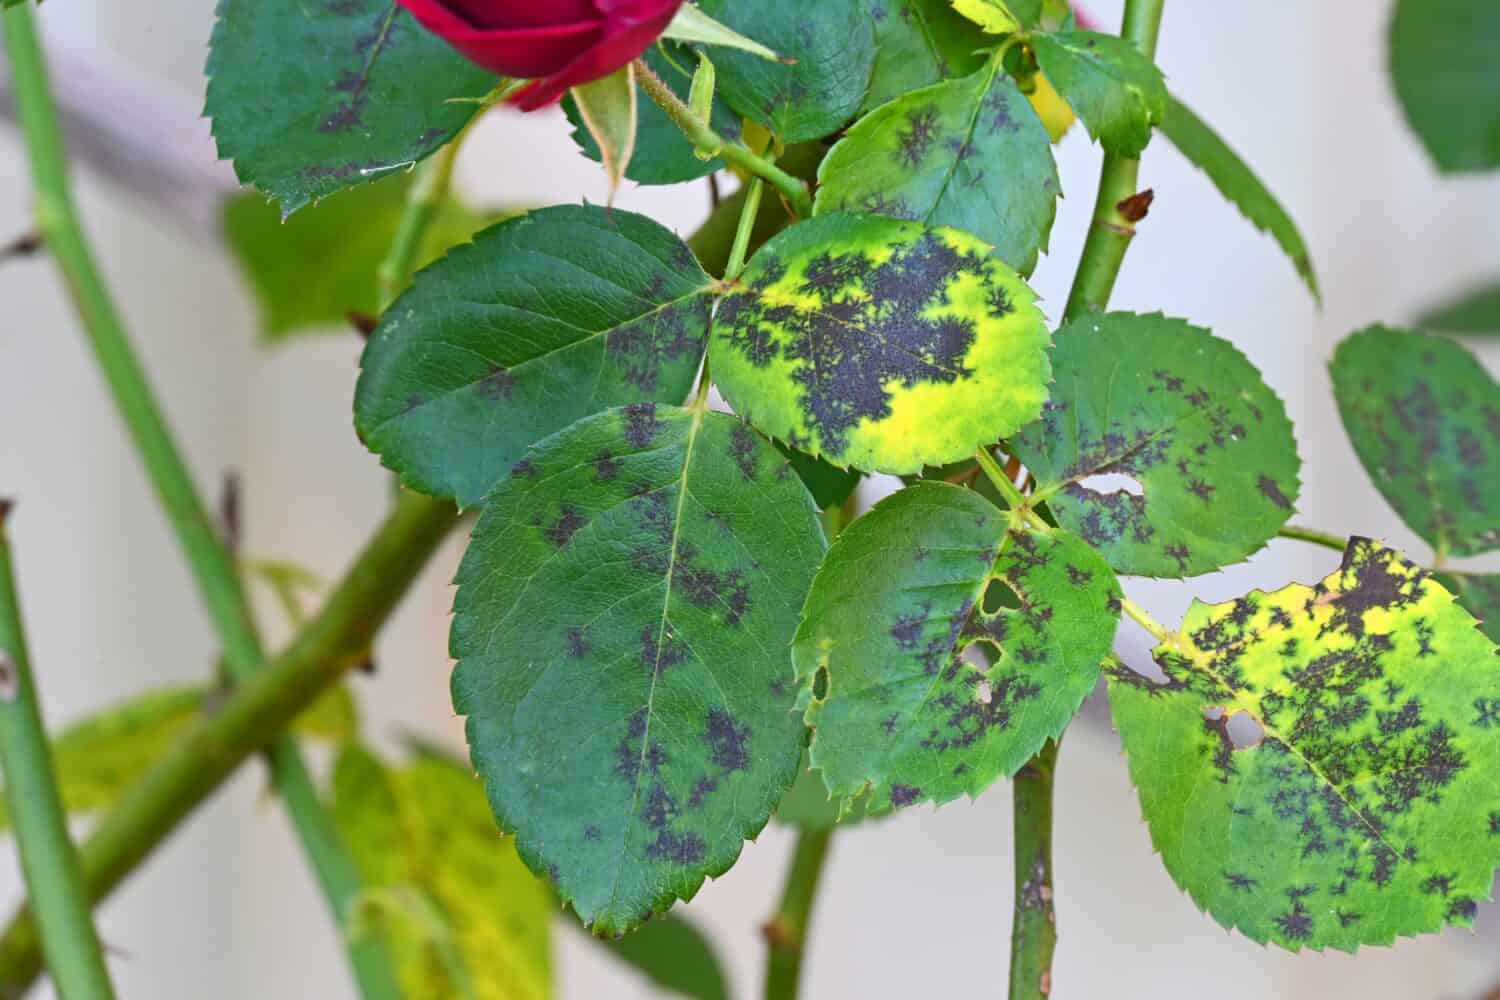 Rose bush leaves with black spots all over them